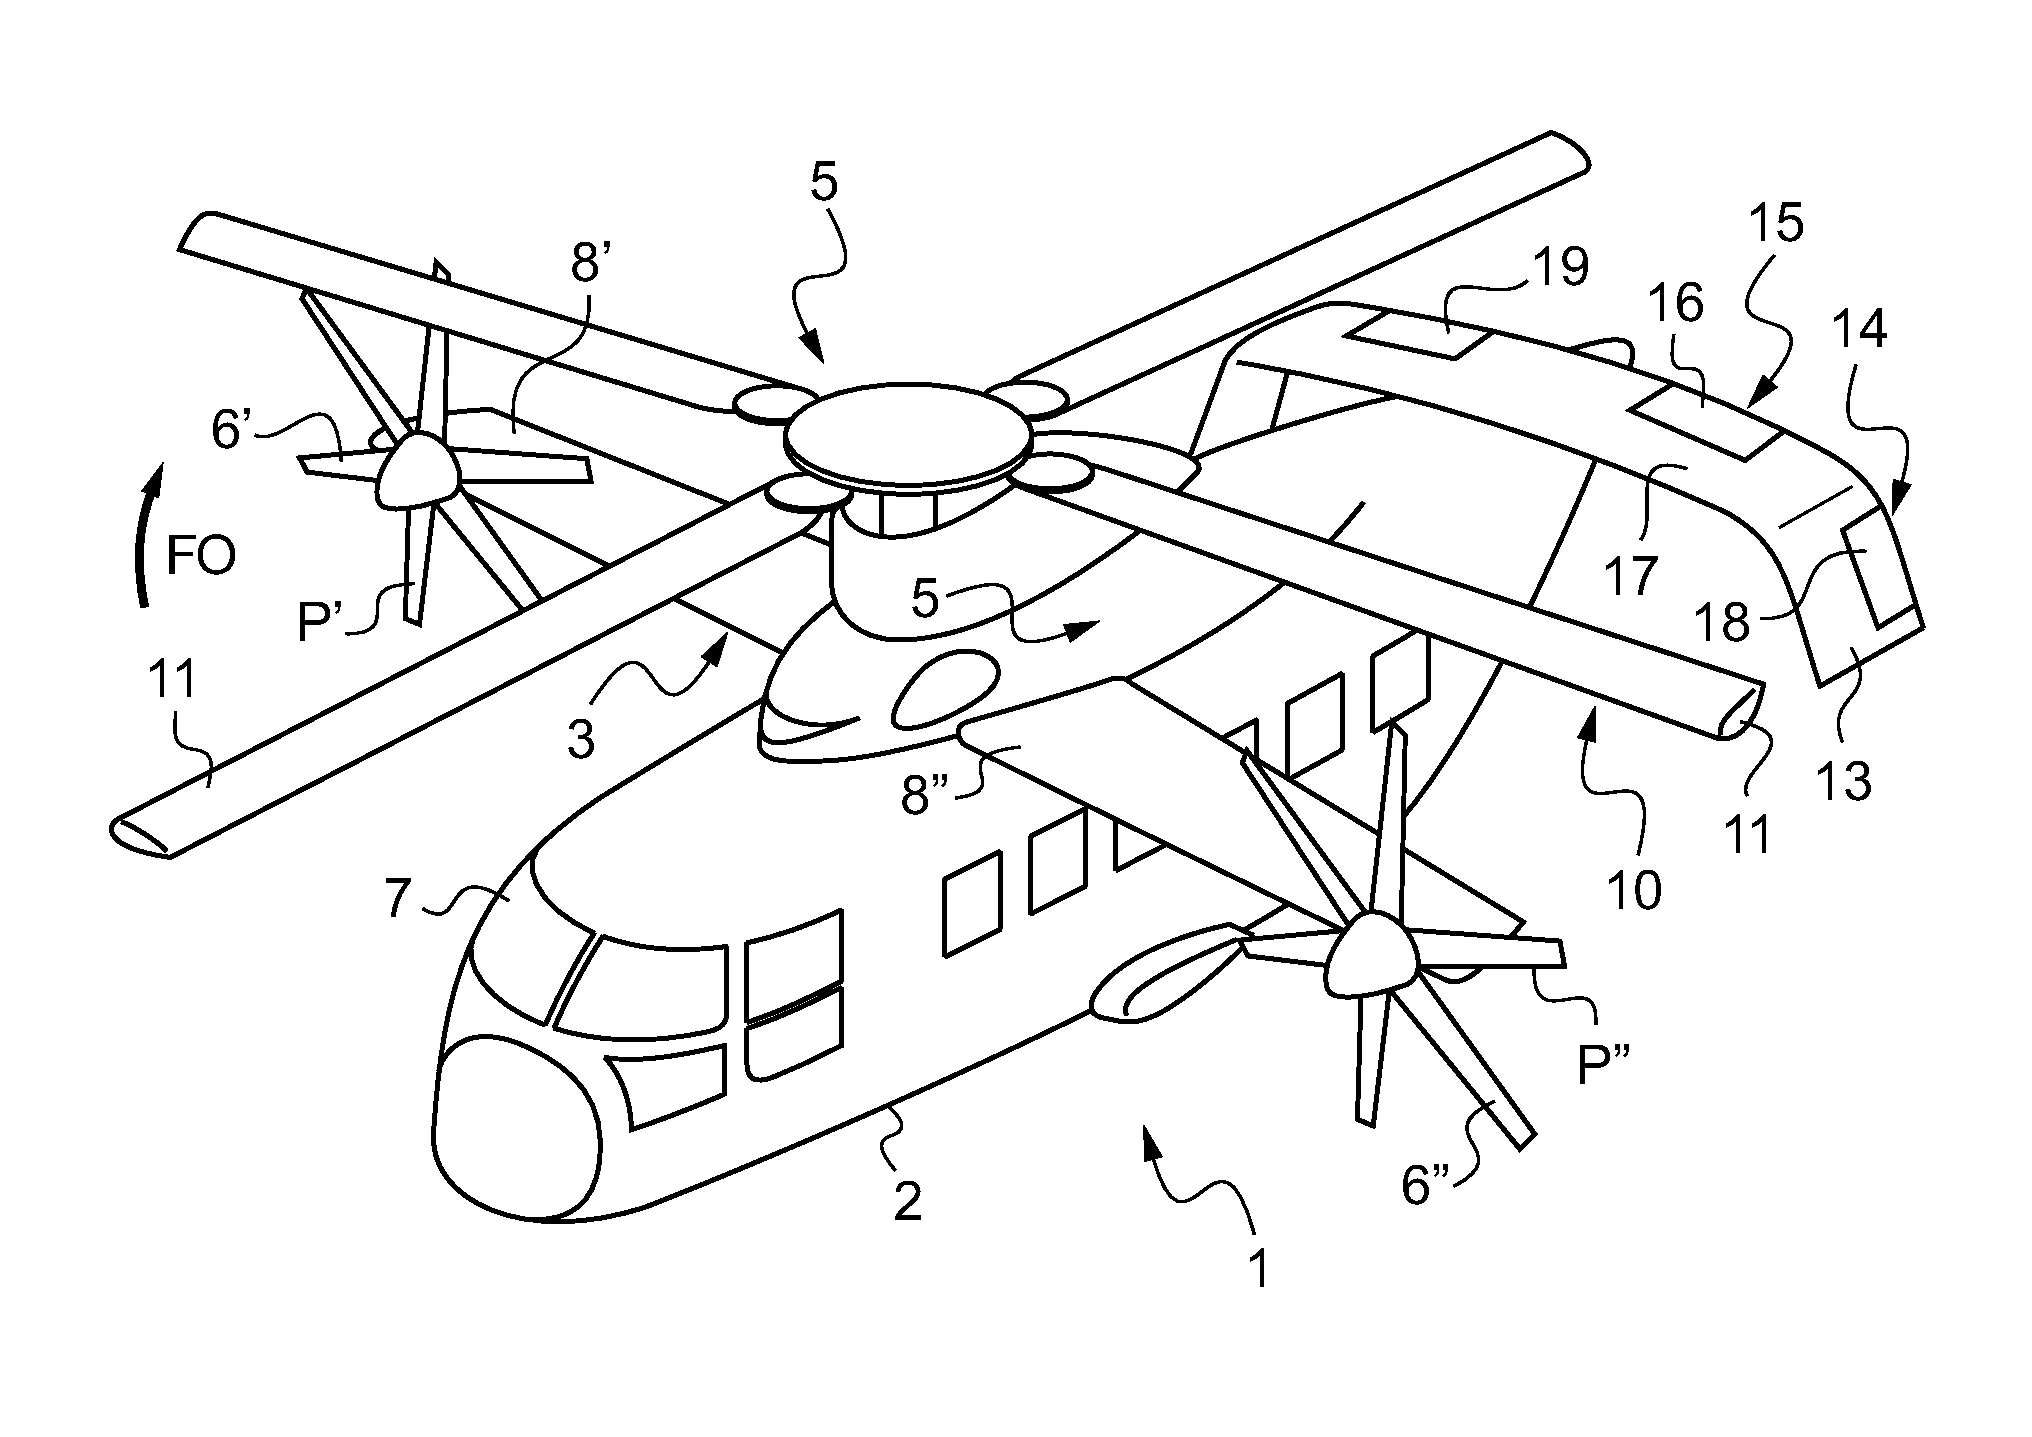 Method of controlling a hybrid helicopter in yaw, and a hybrid helicopter provided with a yaw control device suitable for implementing said method